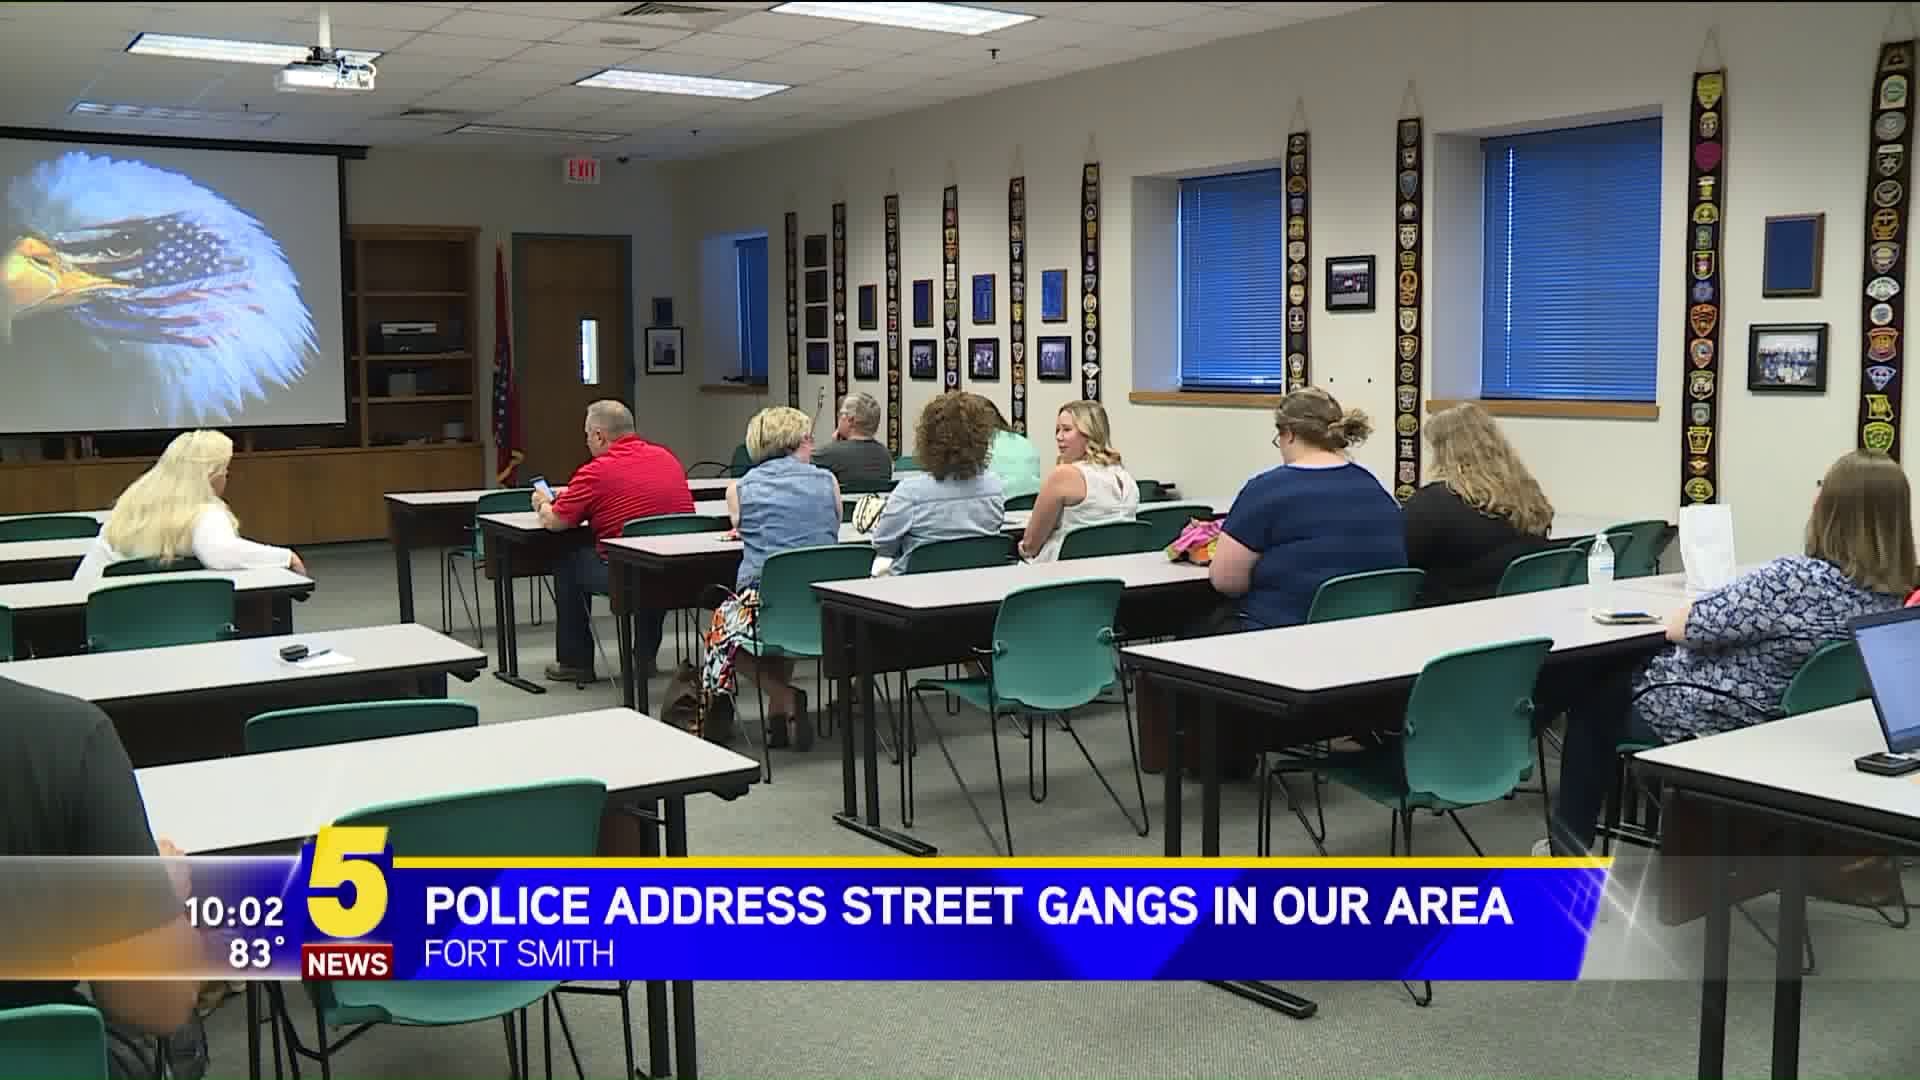 Police Address Street Gangs In Our Area